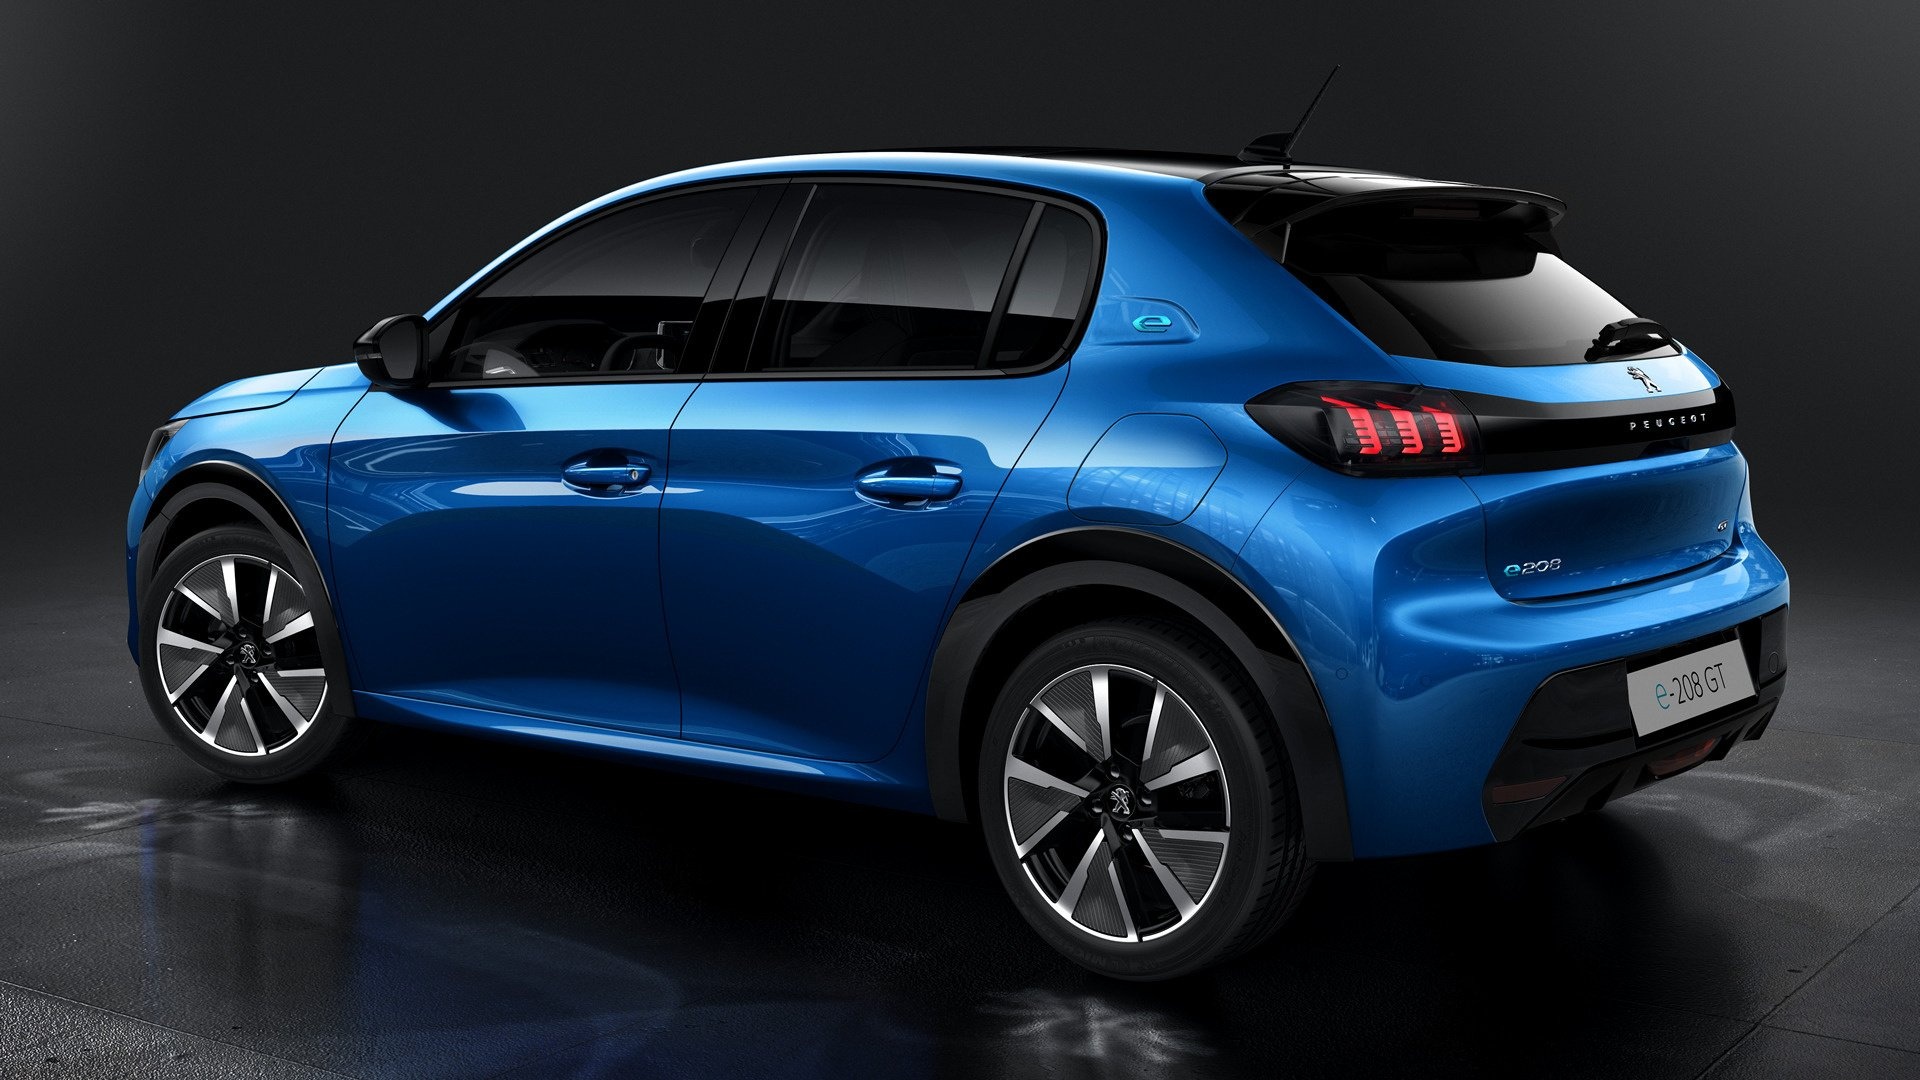 Peugeot 208, E-208 GT HD wallpapers, Revolutionary electric car, Stylish and efficient, 1920x1080 Full HD Desktop